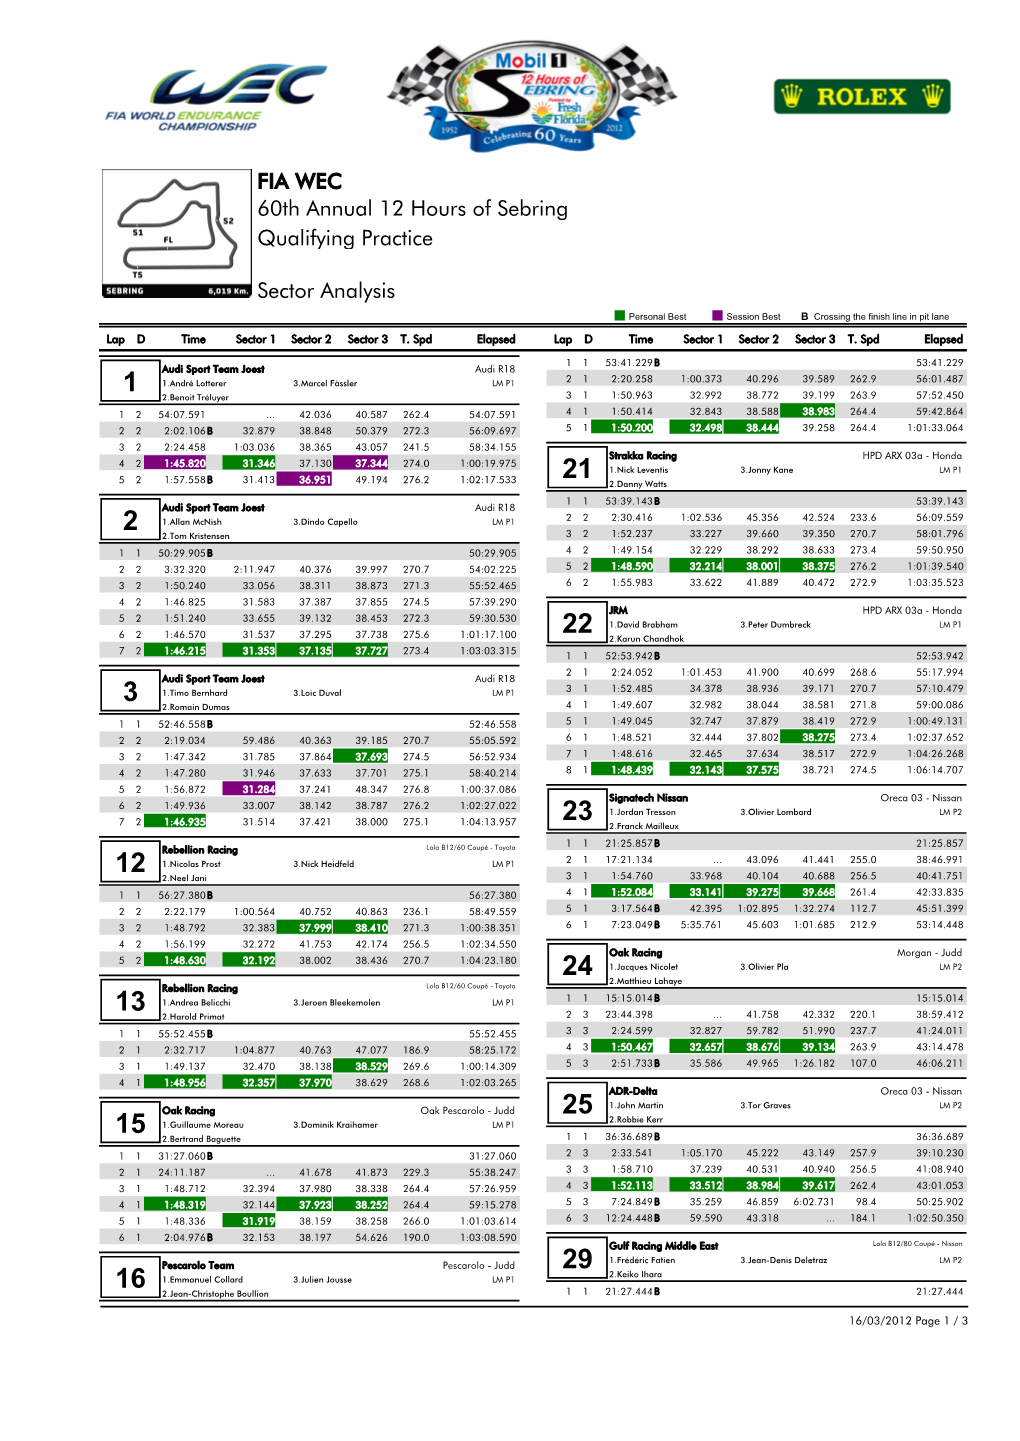 Qualifying Practice 60Th Annual 12 Hours of Sebring Sector Analysis